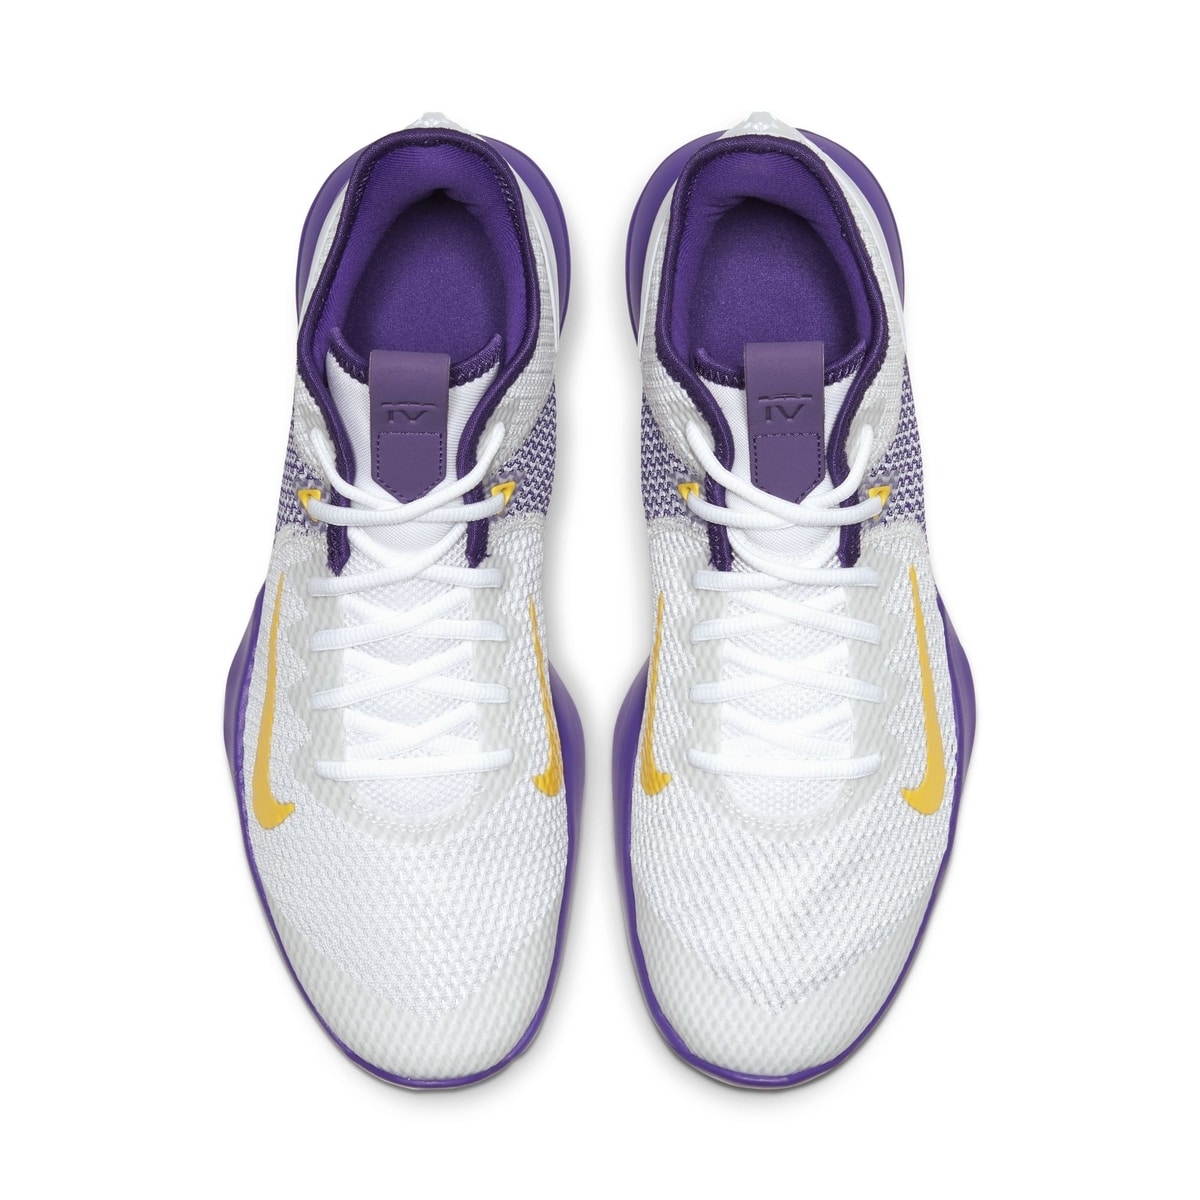 lebron witness 4 lakers colorway